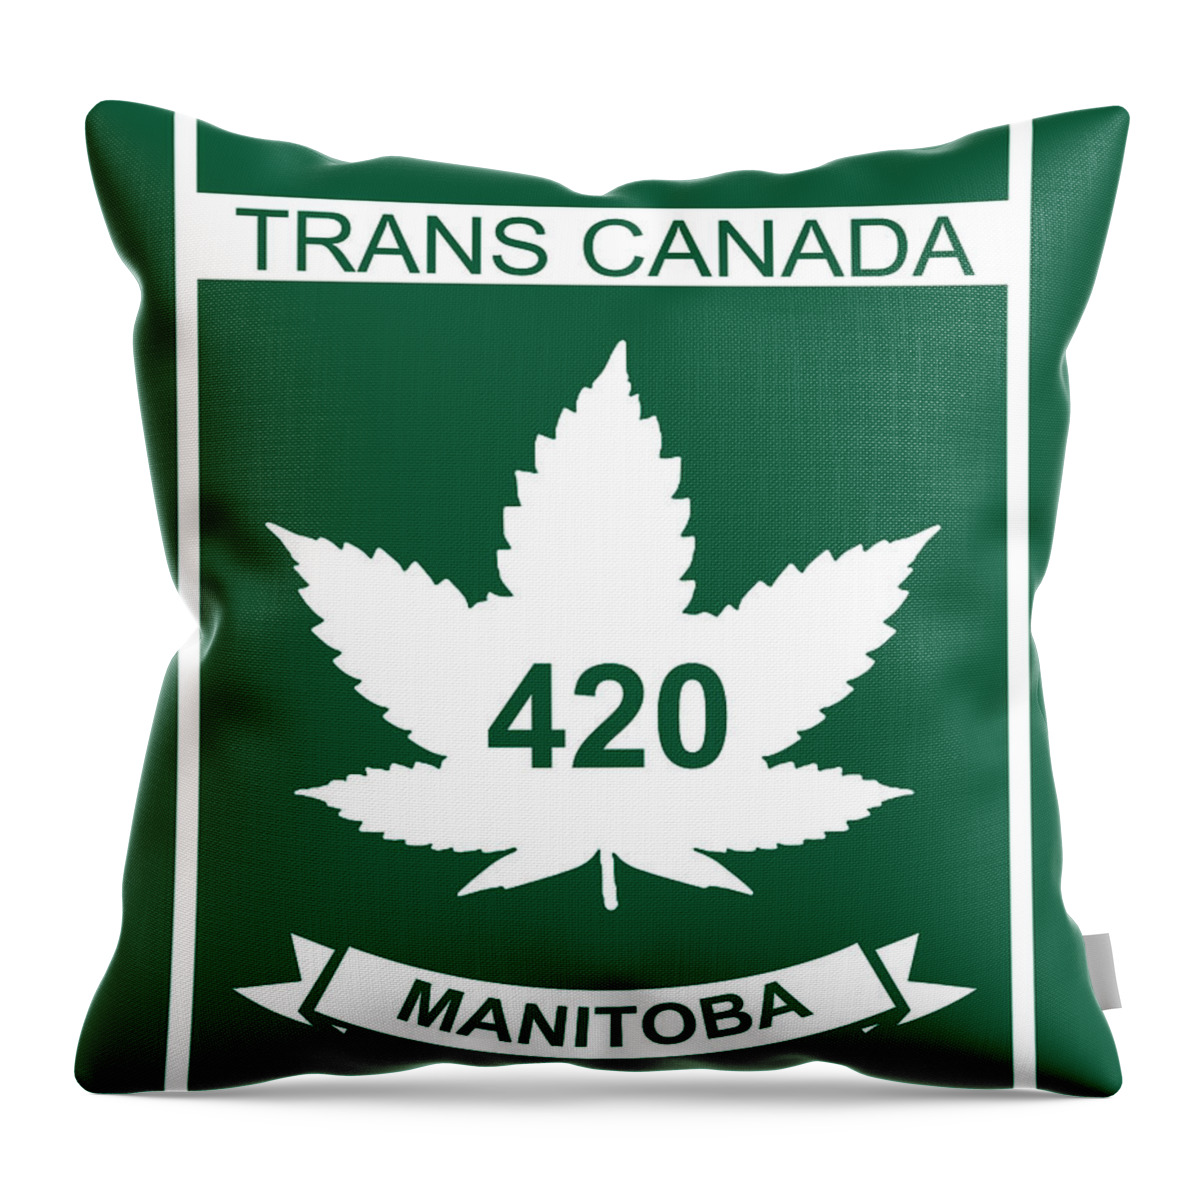 Canada Cannabis Throw Pillow featuring the digital art Trans Canada 420 Manitoba - Quality Poster by Smoky Blue